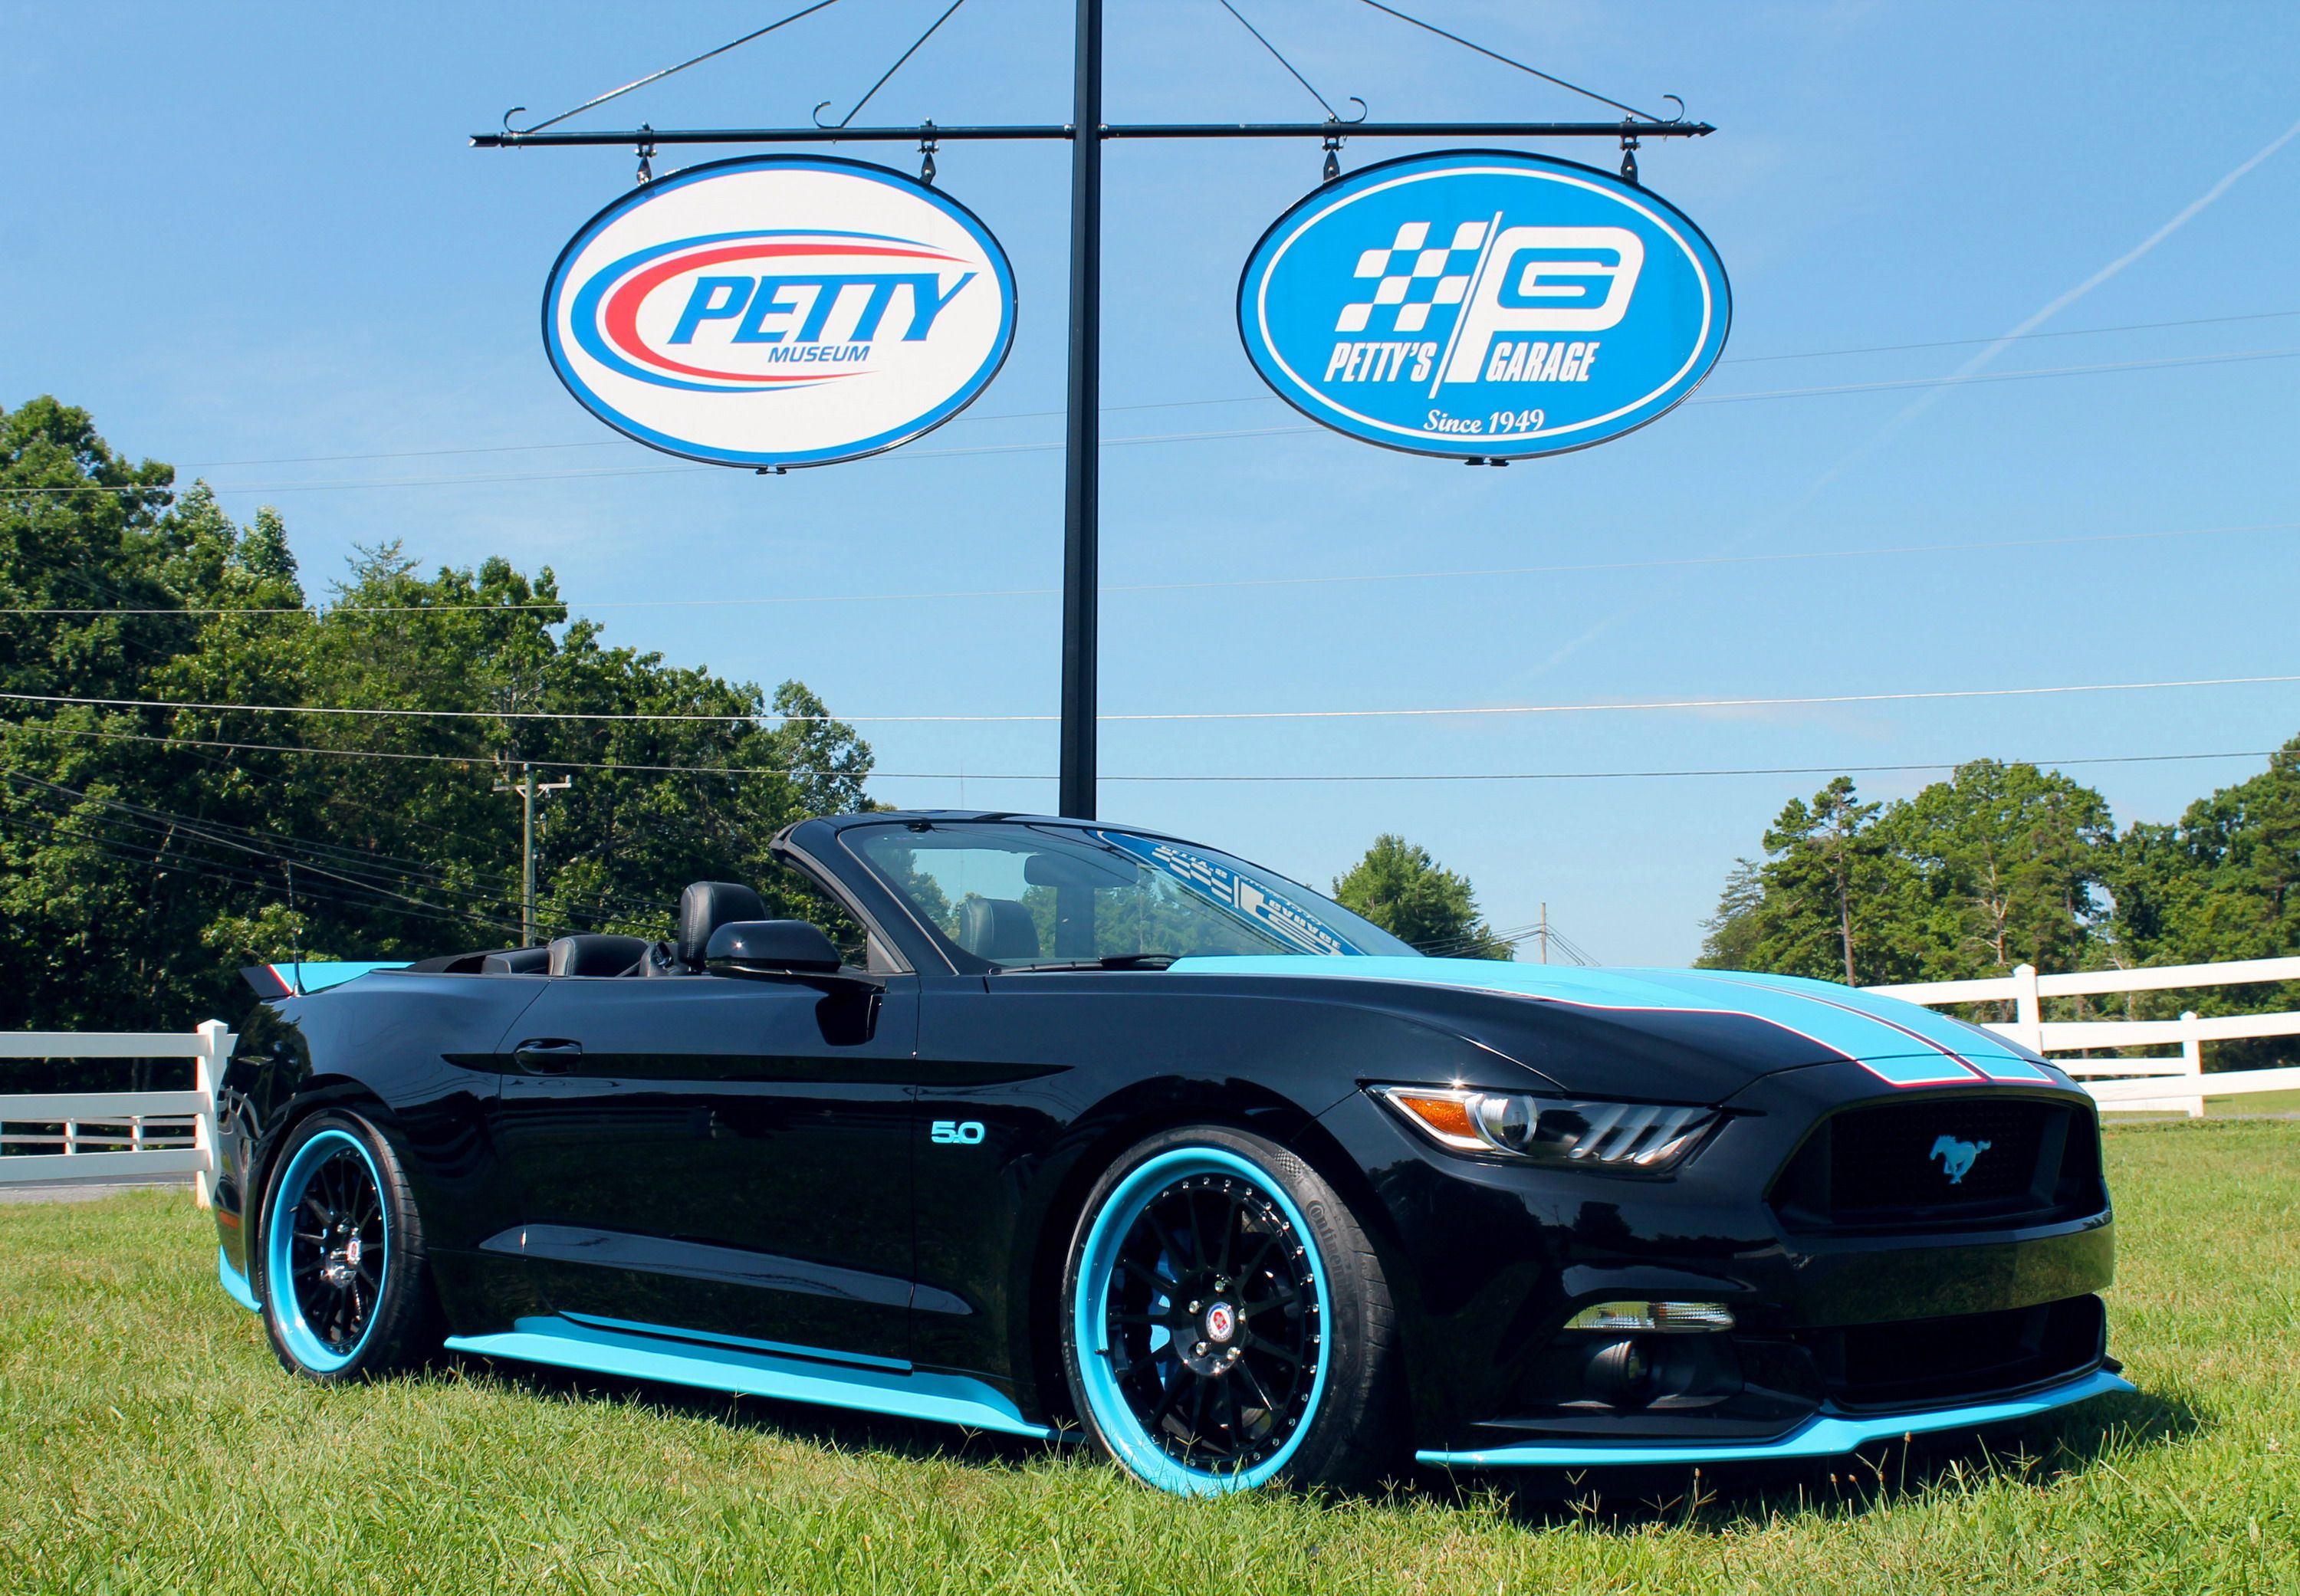 2016 Ford Mustang GT King Edition By Petty's Garage